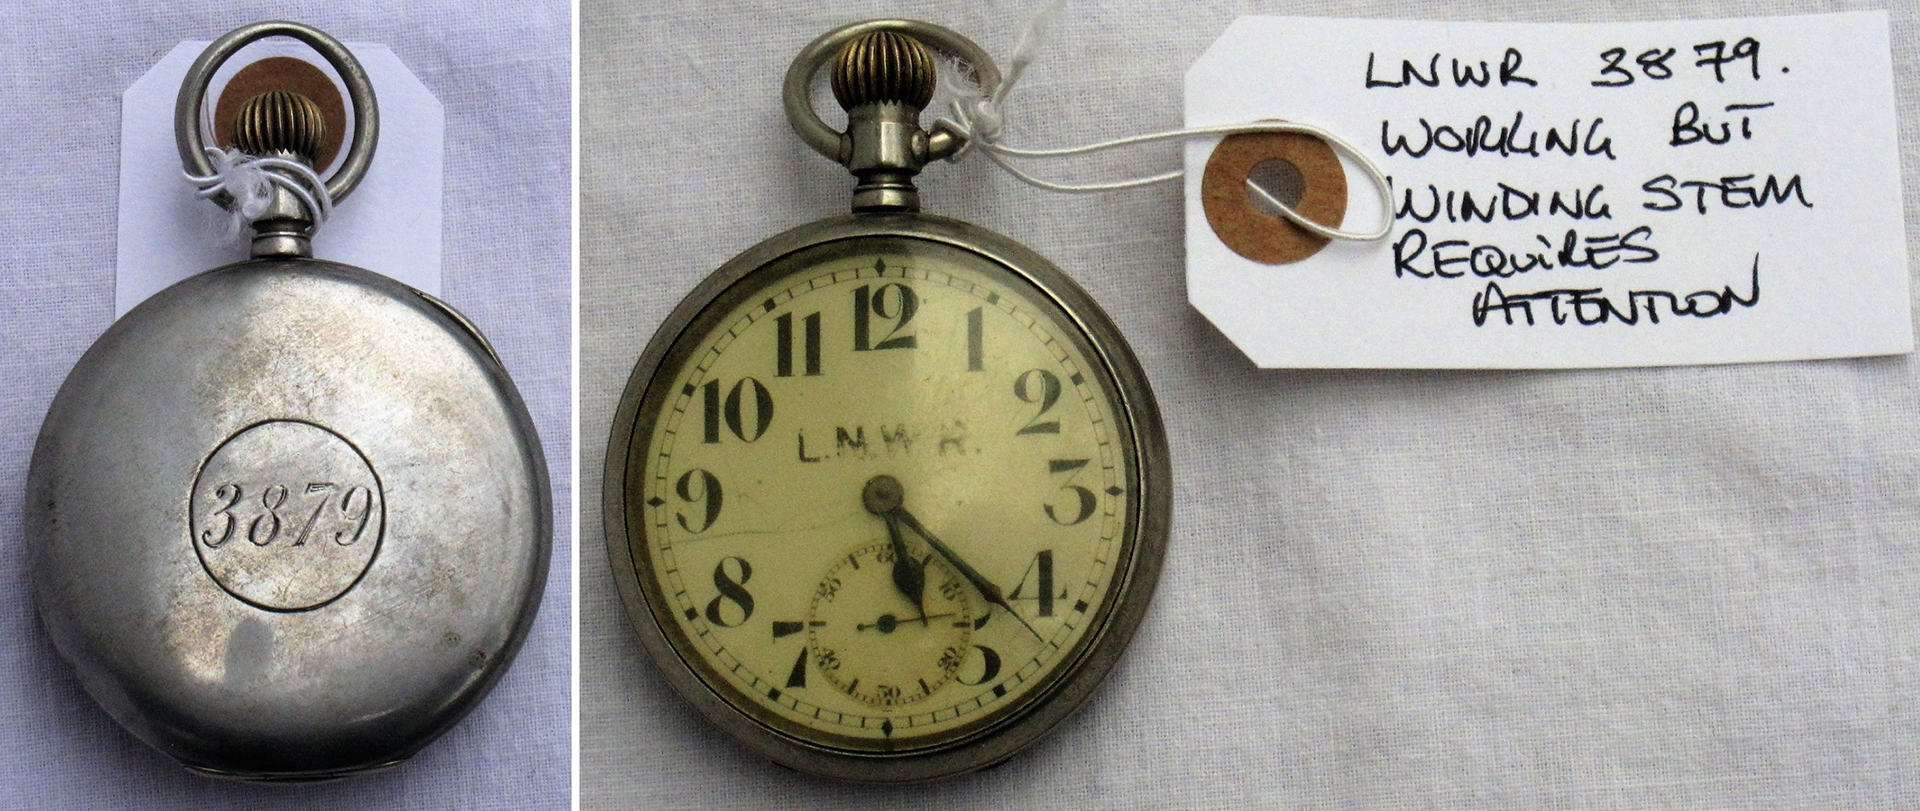 LNWR Guards Watch. Engraved on rear No 3879 in circle. Working but top winder needs attention.